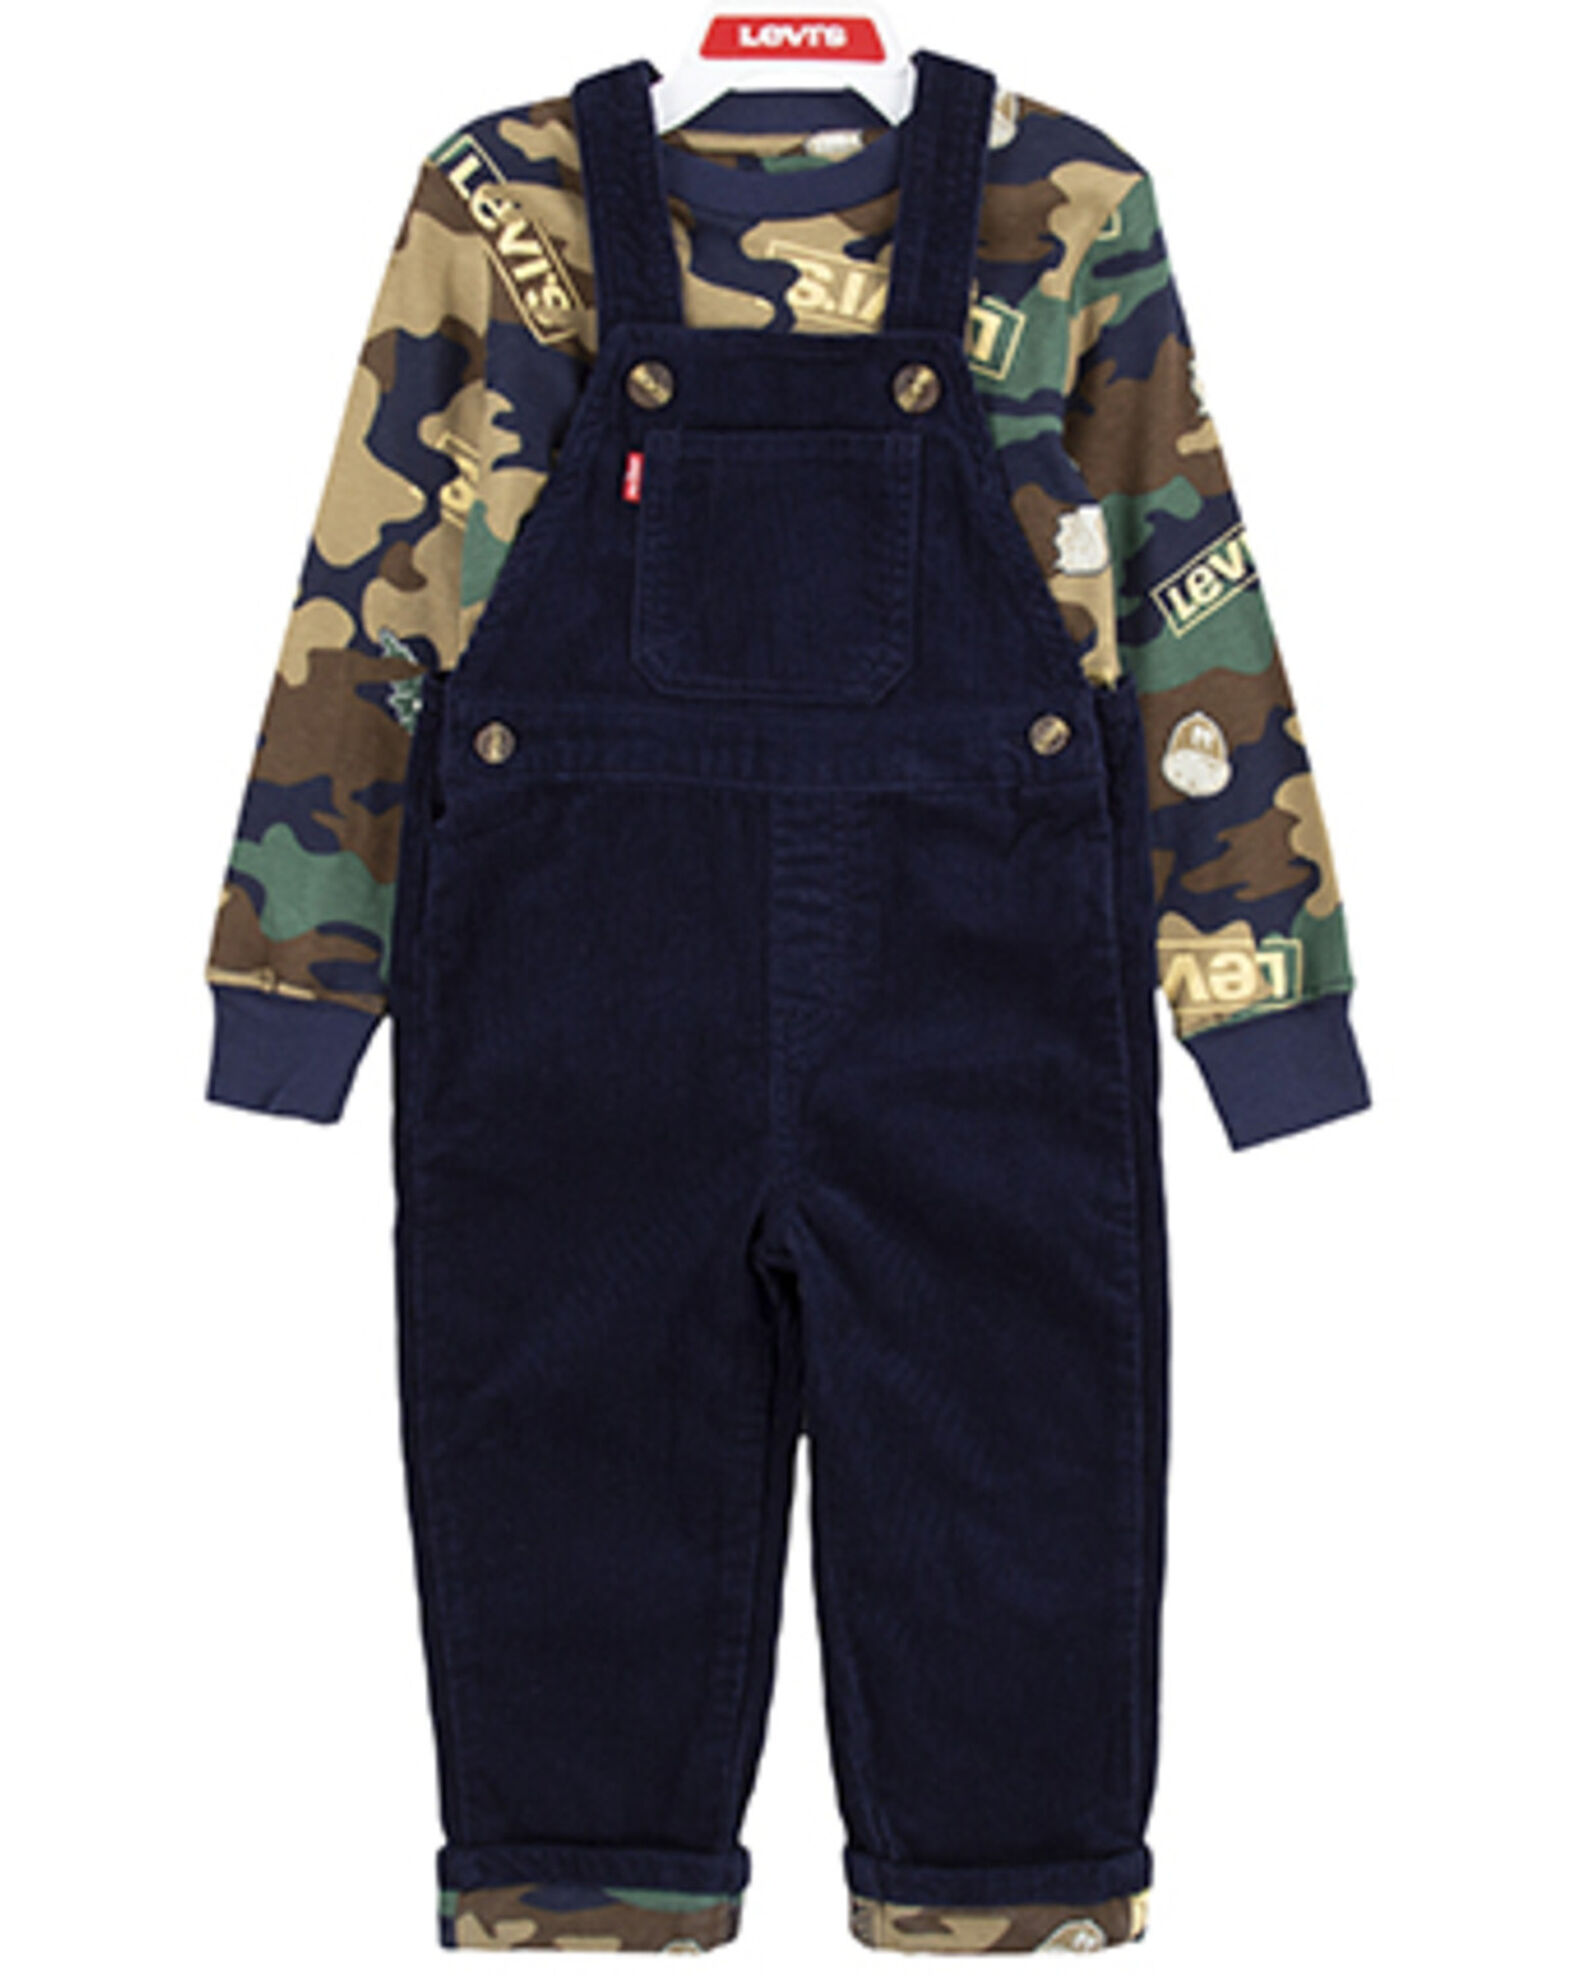 Levi's Toddler Boys' Camo Print Long Sleeve T-Shirt & Corduroy Overalls Set  - 2-Piece - Country Outfitter